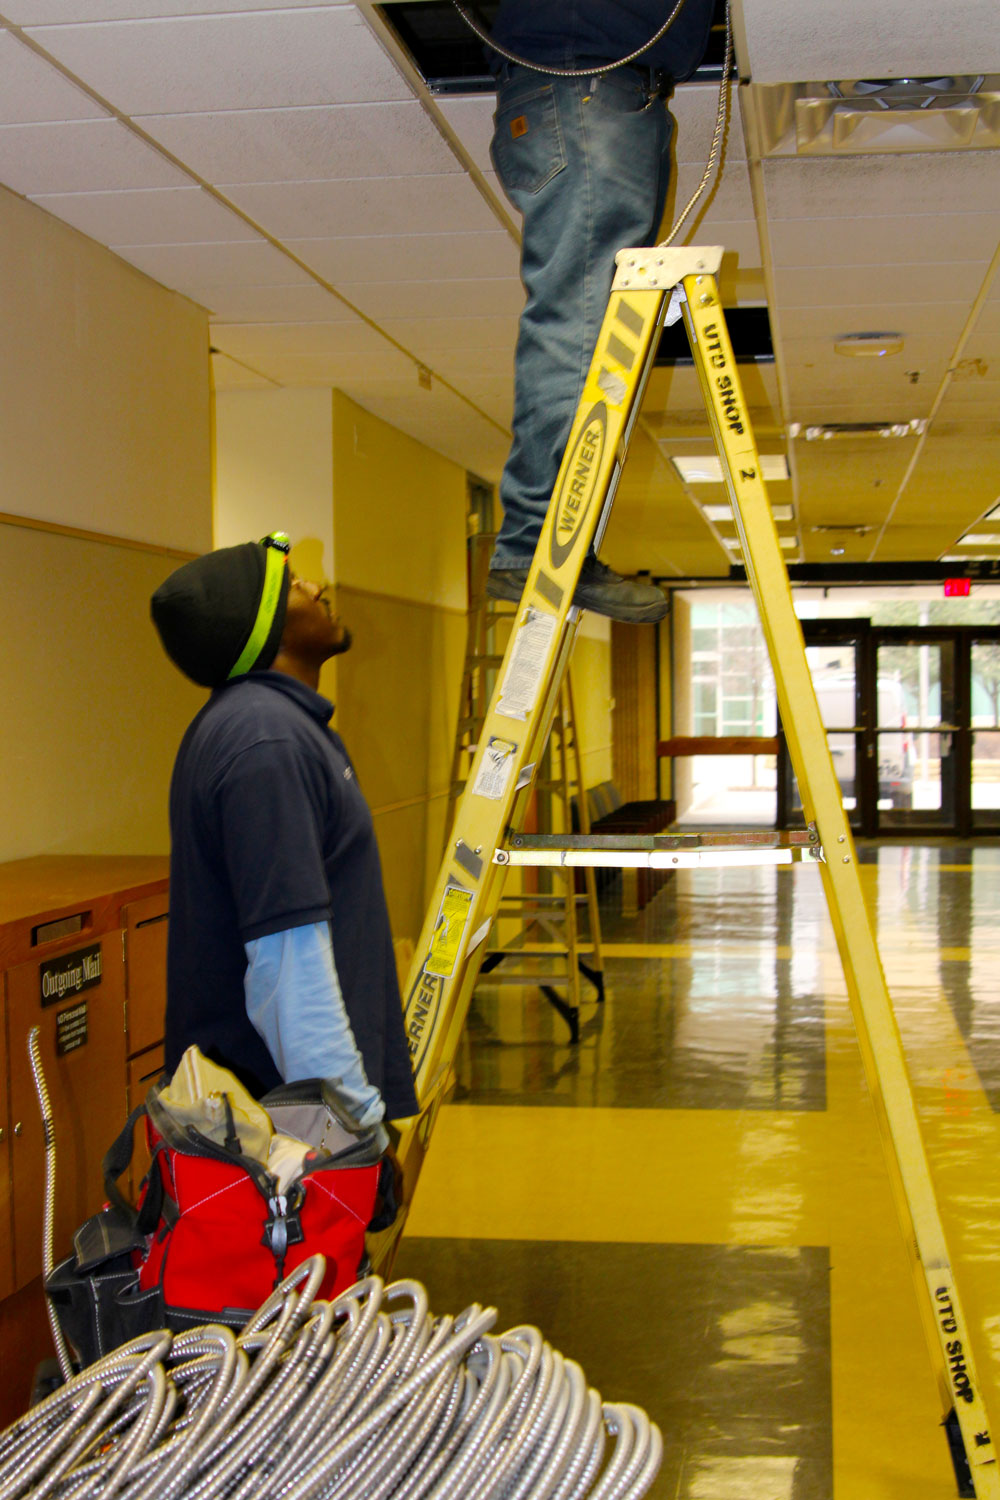 Electrical. A pair of electricians working on ceiling wiring.